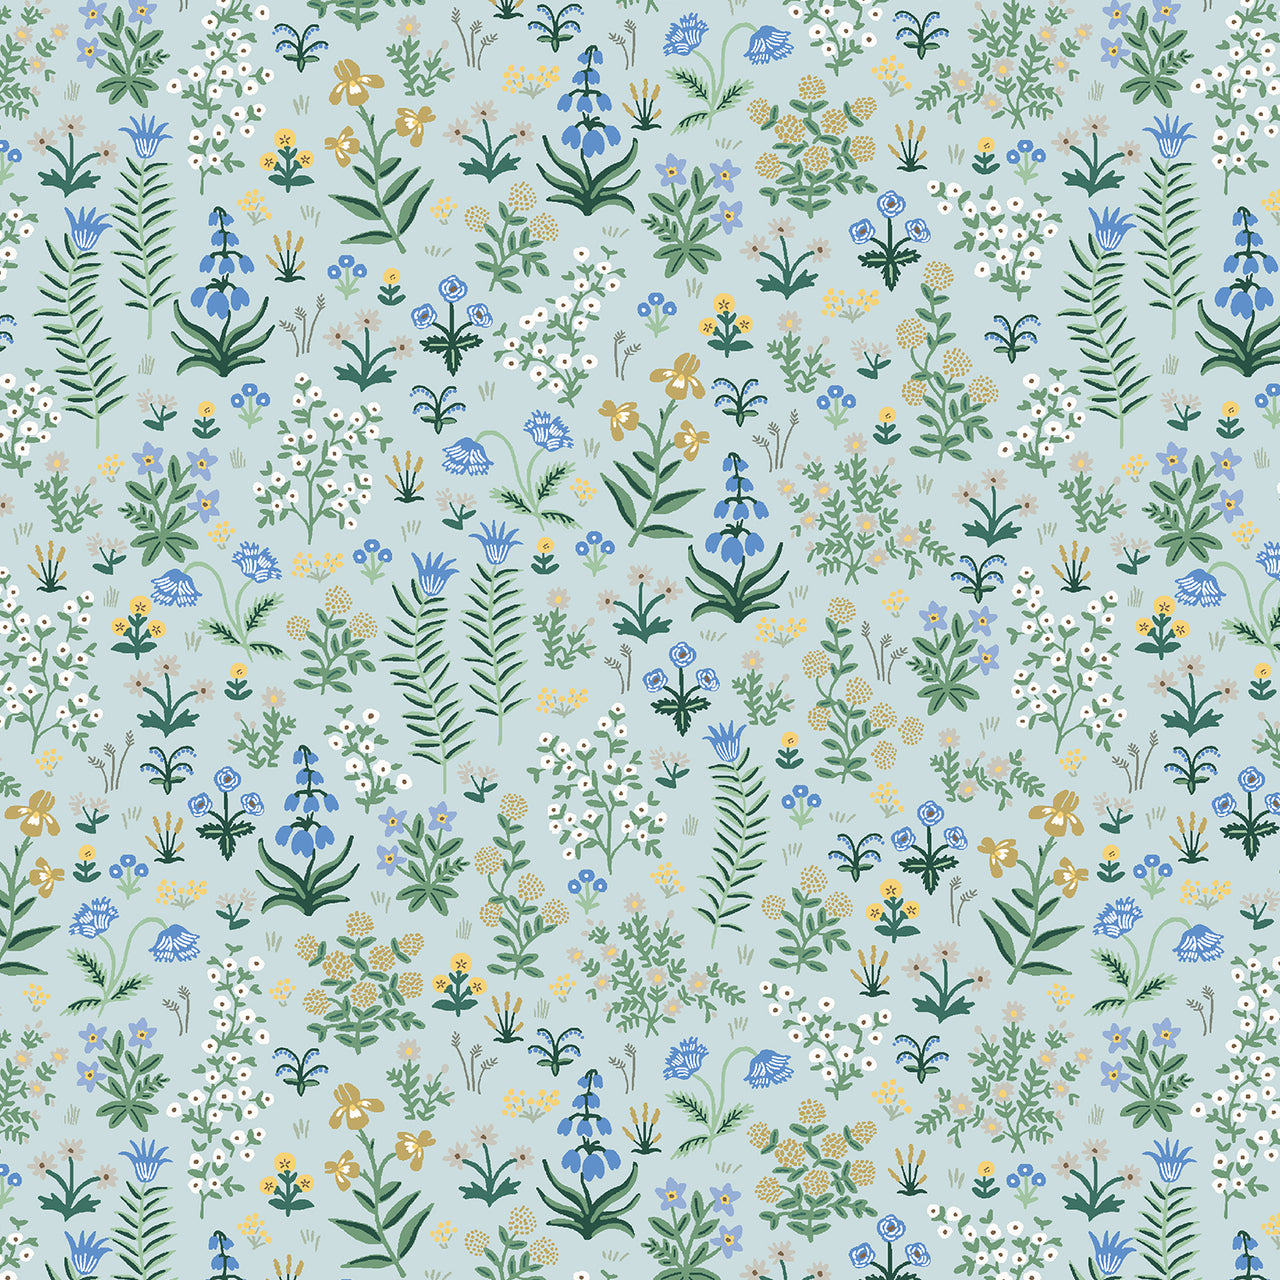 Camont by Rifle Paper Co : Menagerie Garden in Mint : Cotton and Steel